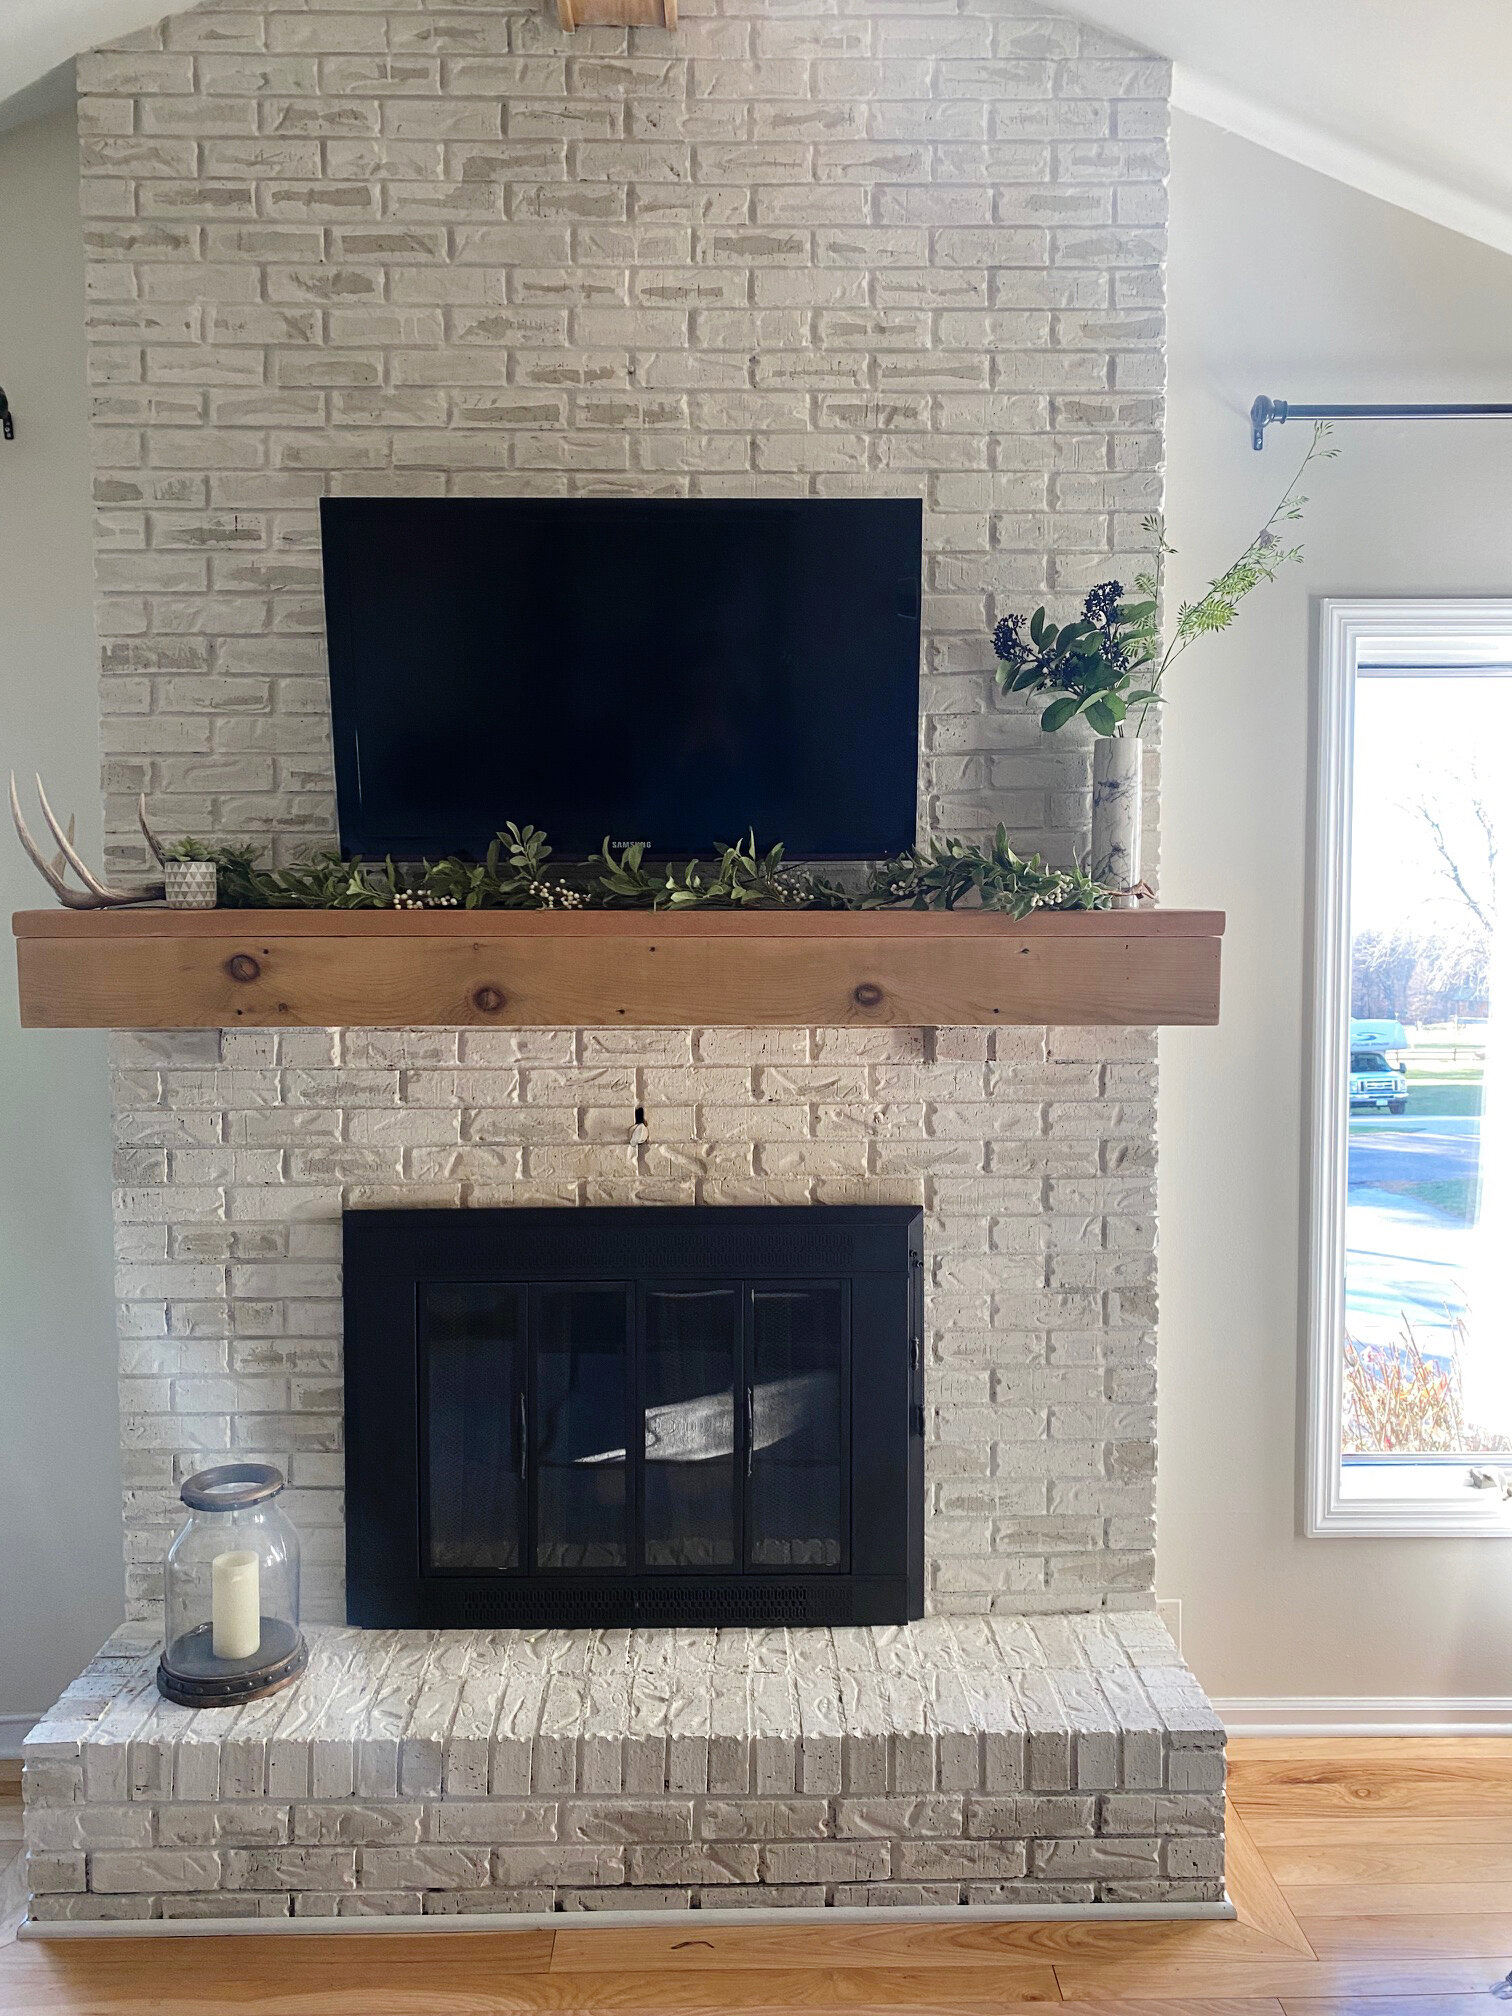 My Painted Brick Fireplace Diy Tutorial, Can I Spray Paint My Brick Fireplace